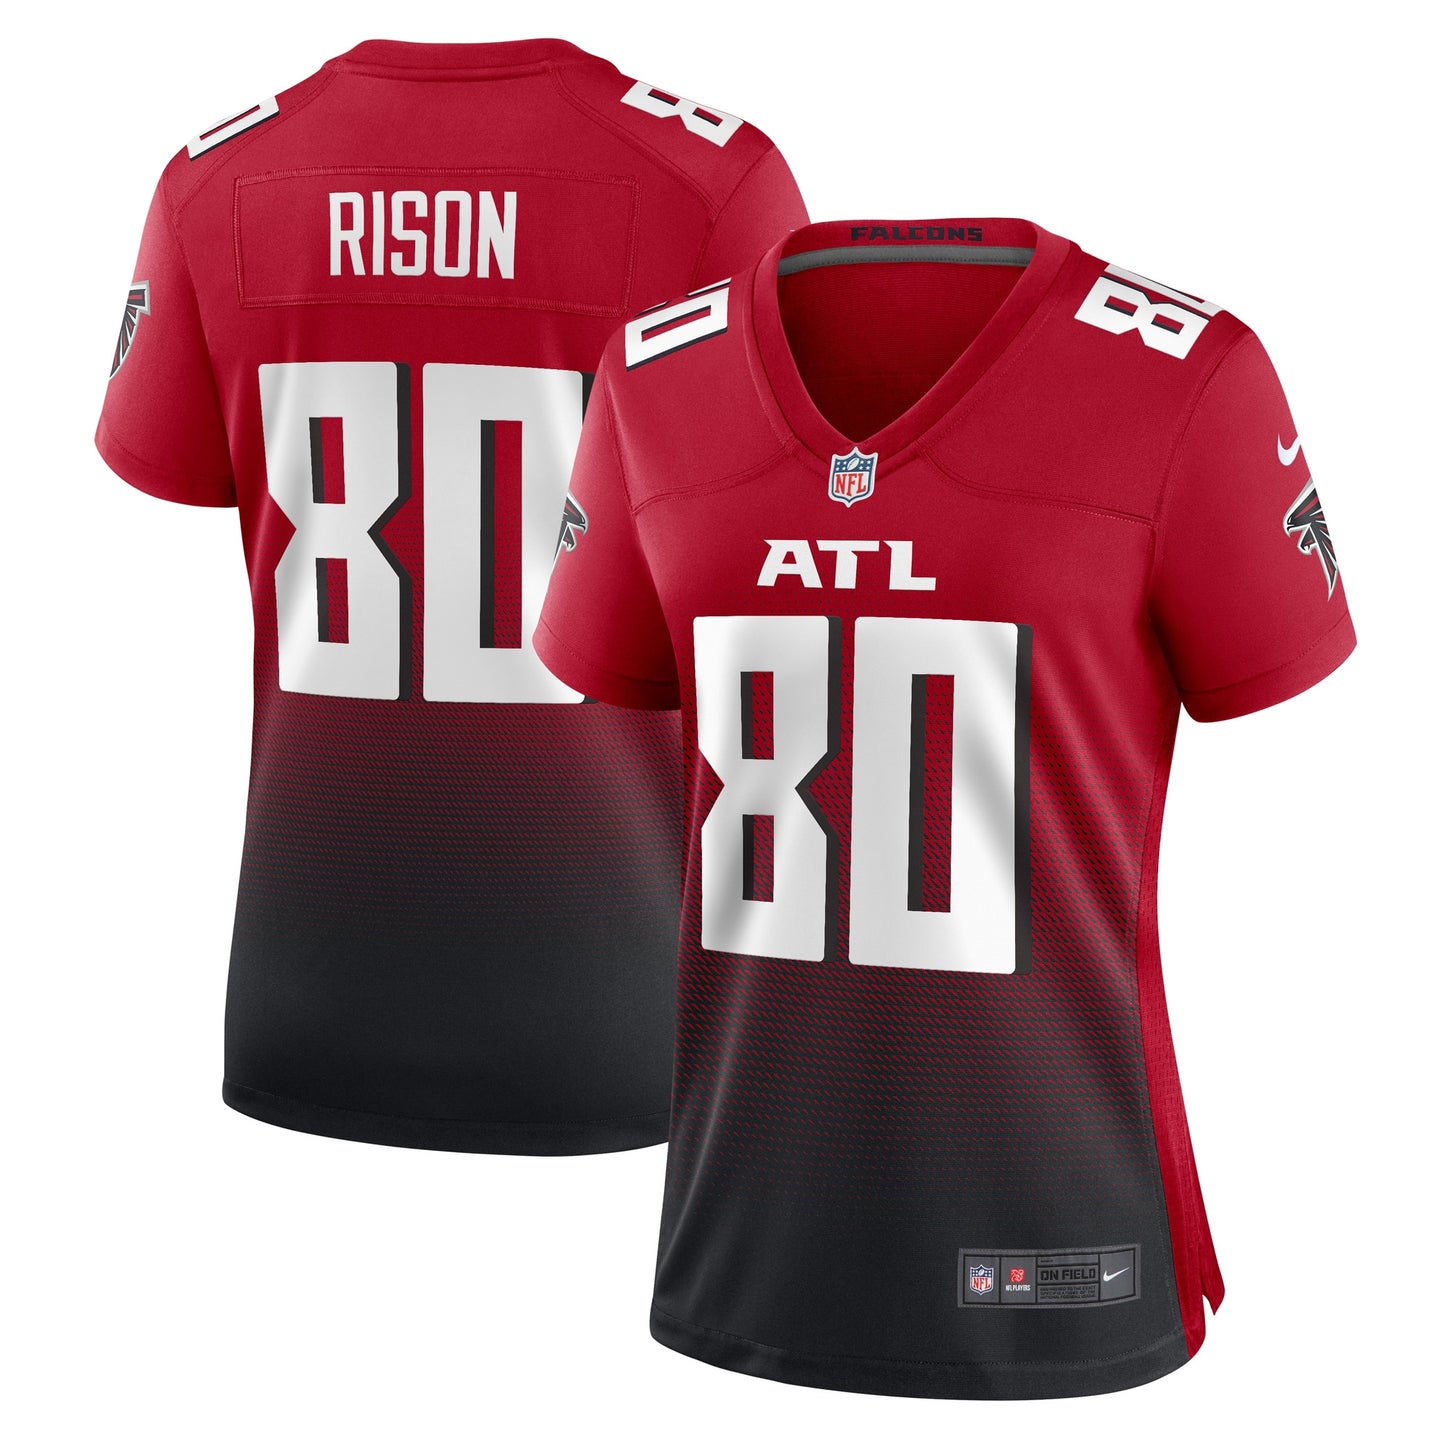 Andre Rison Atlanta Falcons Nike Women's Retired Player Jersey - Red